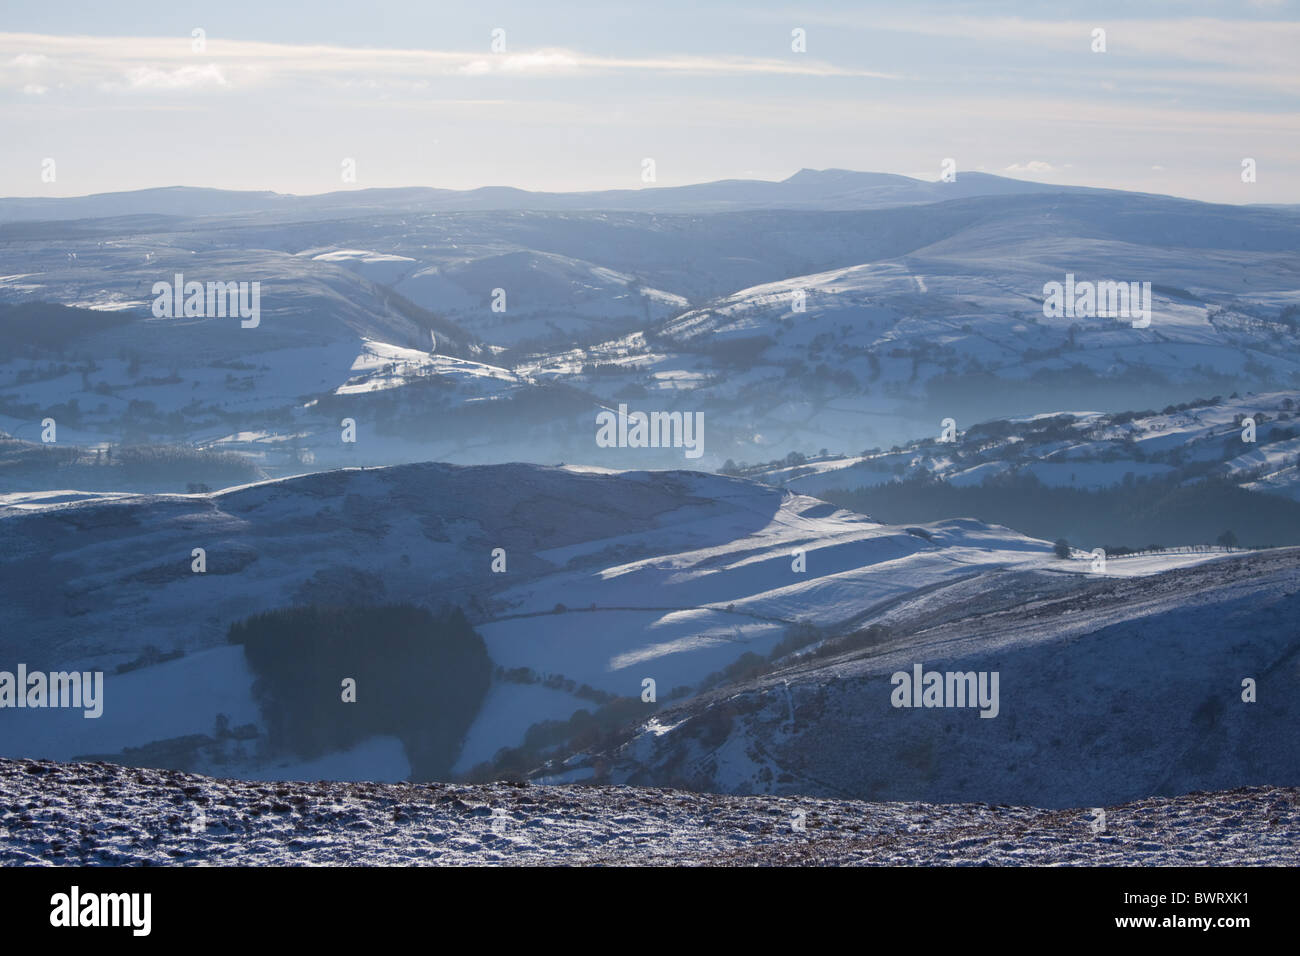 Looking at the Berwyn mountain range in winter from Moel y Gamelin, over the Vale of Llangollen, Wales, UK Stock Photo